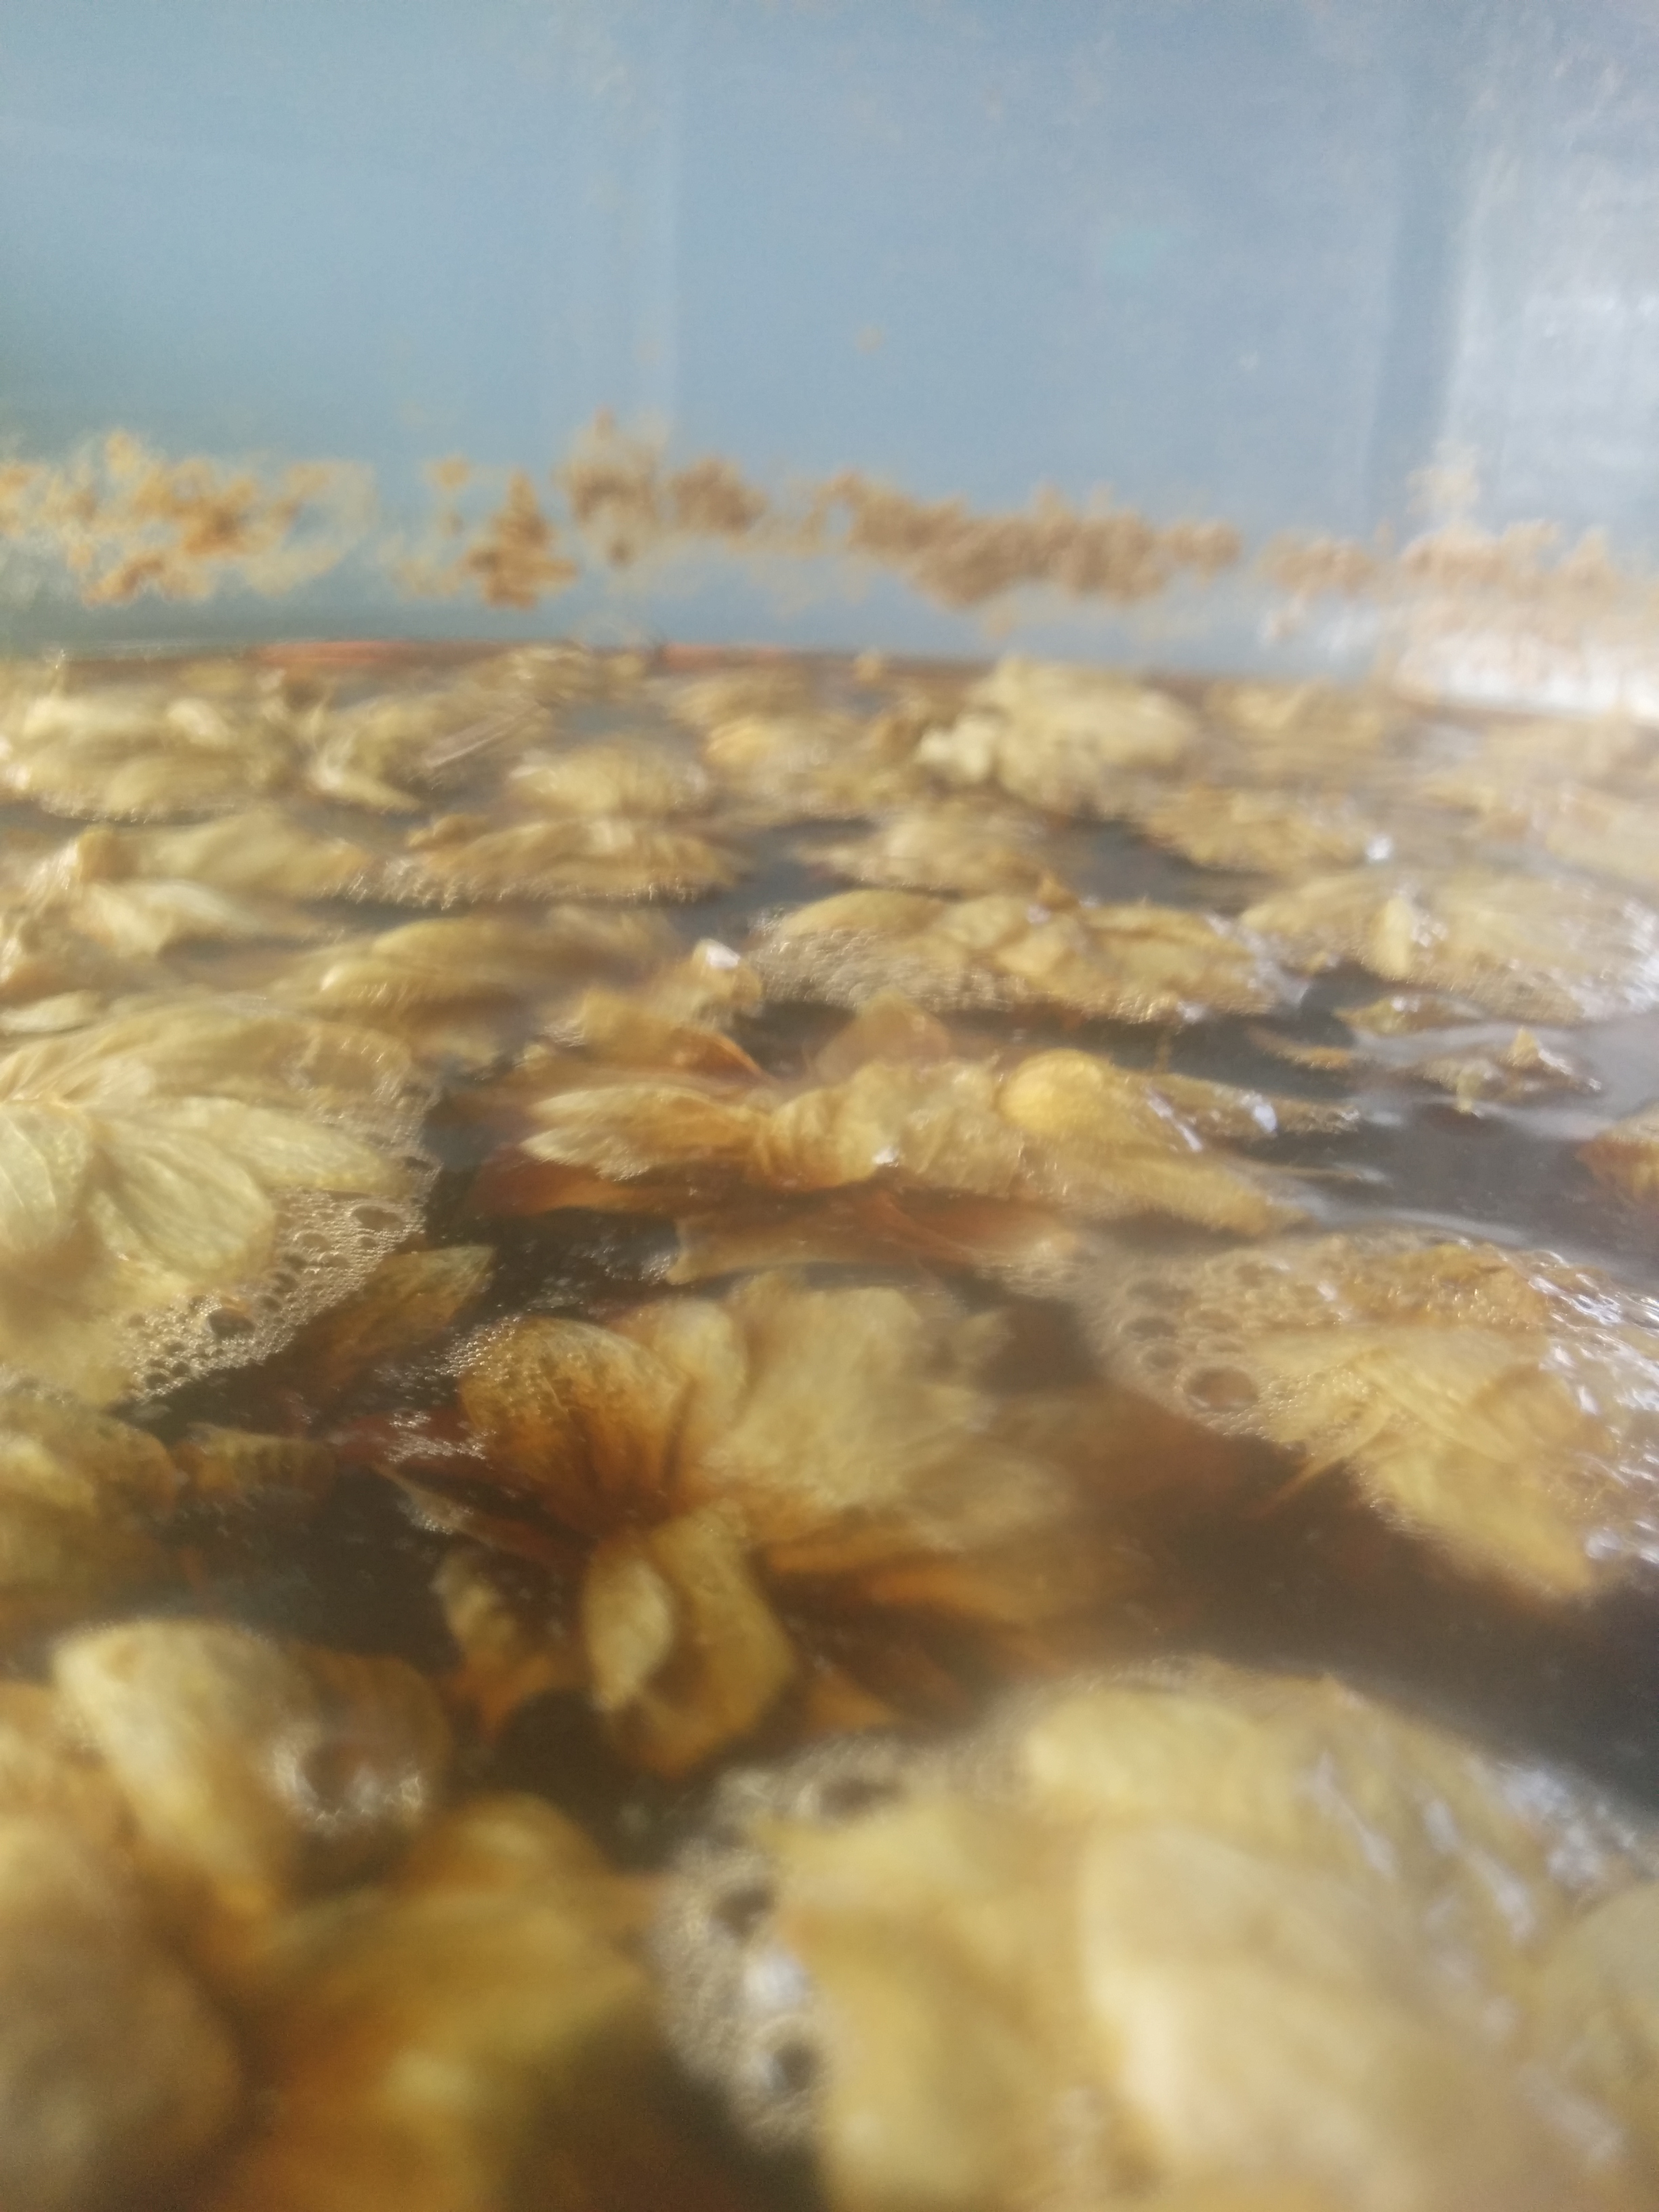 Closeup shot of hops floating in my carboy